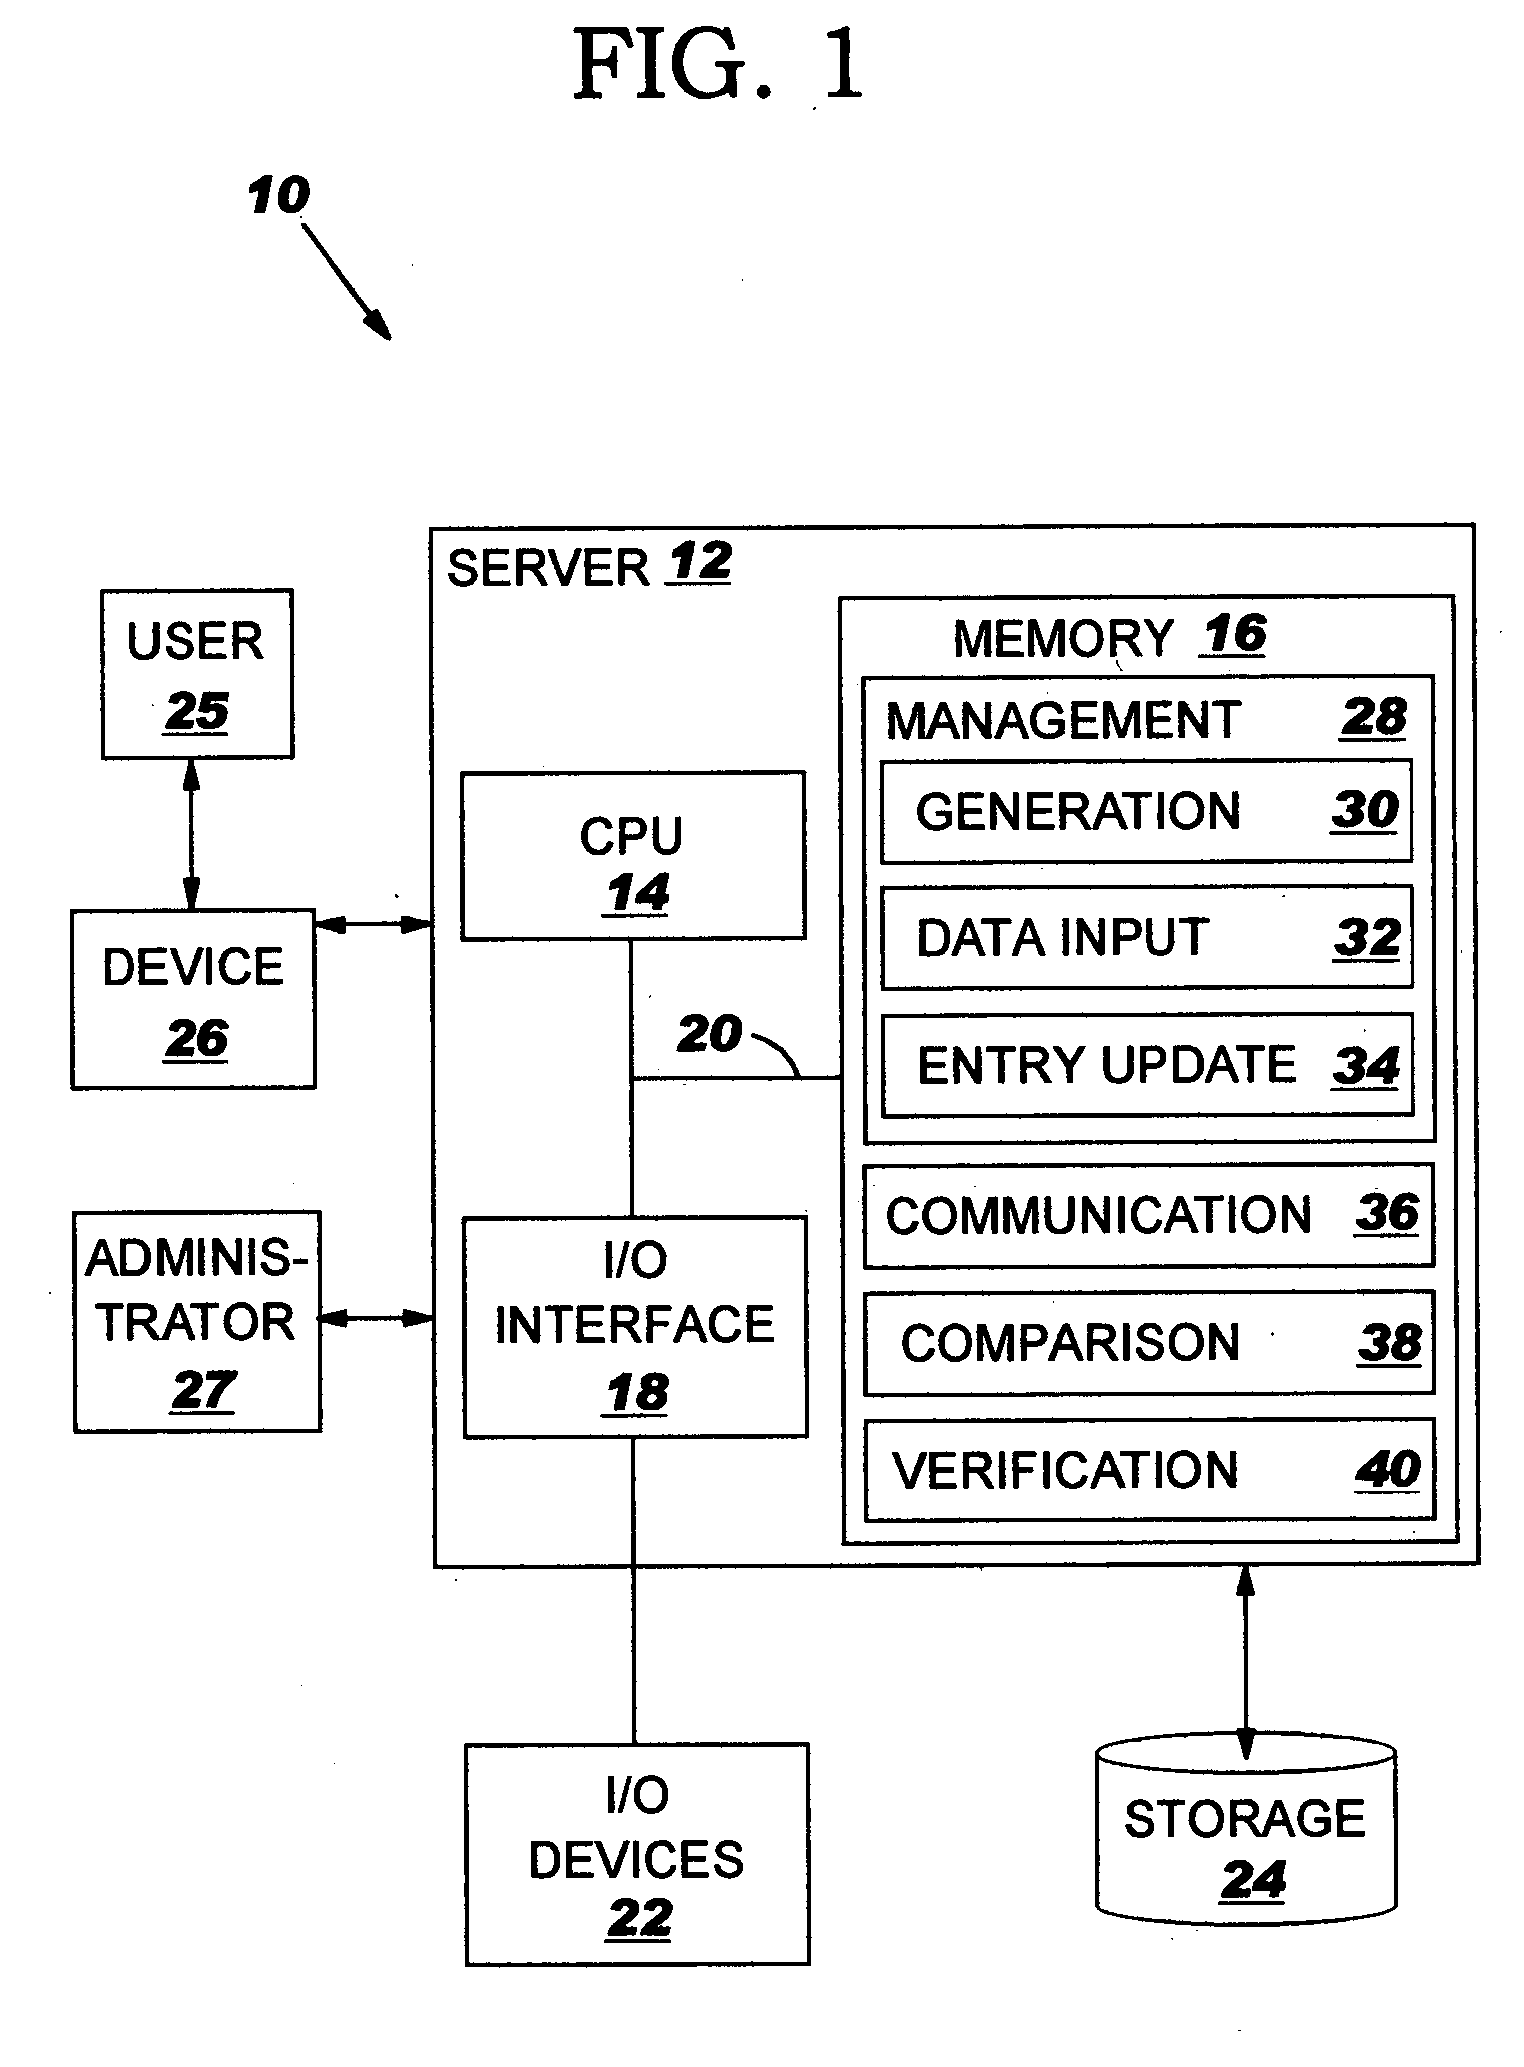 Method, system, and program product fo rmanaging device identifiers